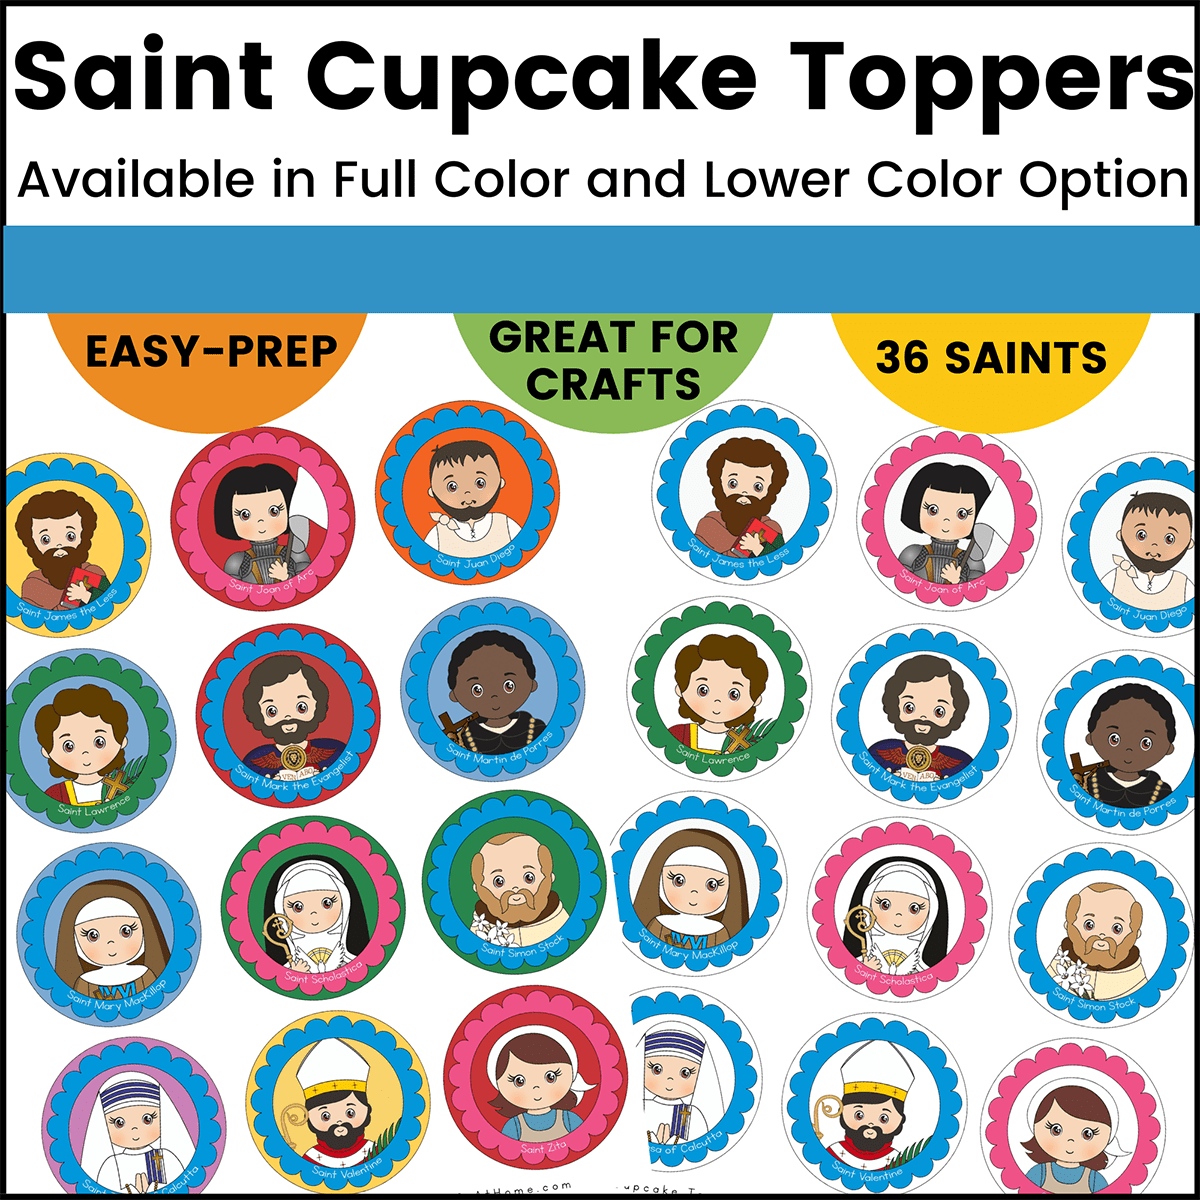 Saint Cupcake Toppers